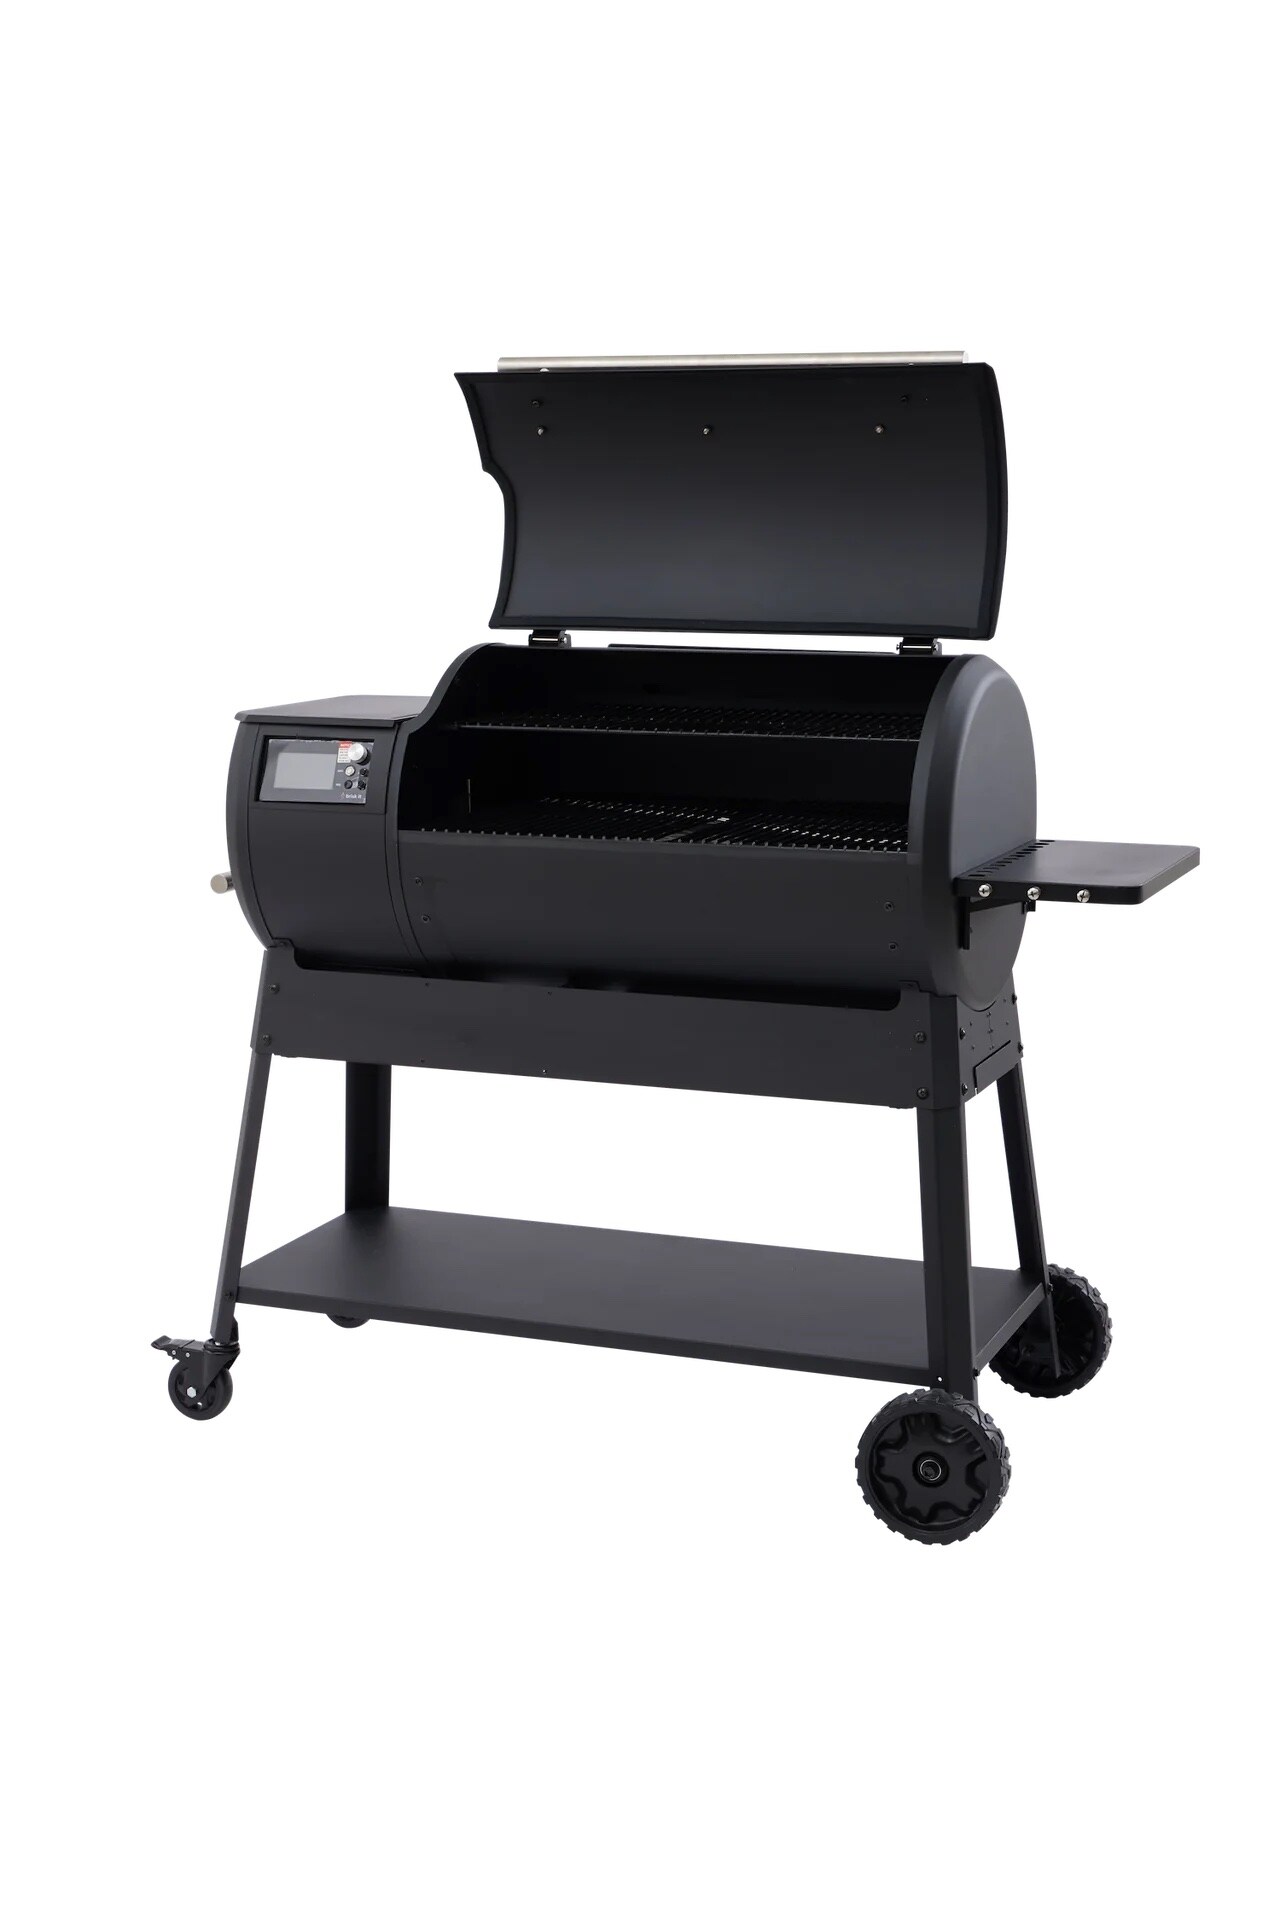 Brisk It Bgo940 Brisk It Origin-940 with Smart Compatibility Grill 940-Sq in Black/Silver Pellet Grill Smart, Size: Cooking Space: 940 Sq in Pellet